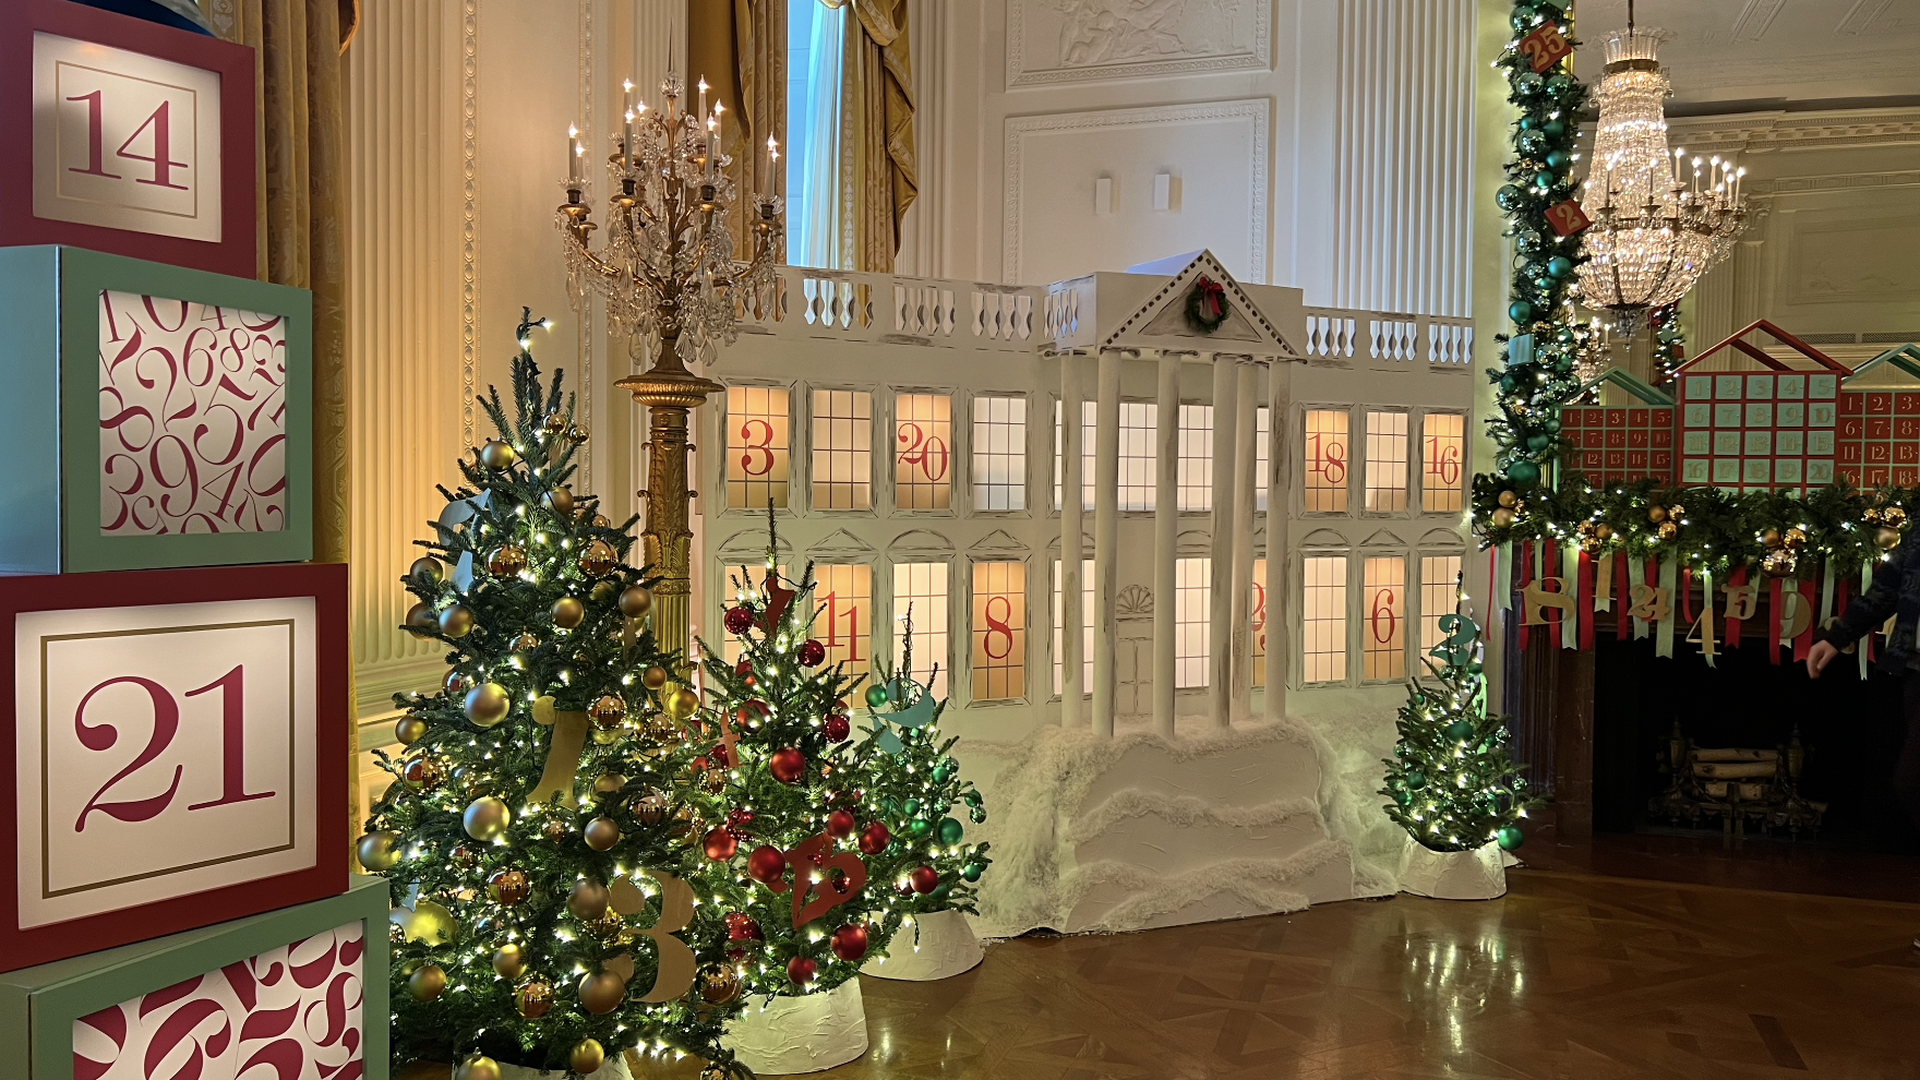 The East Room of the White House's holiday decor, which includes a mini White House and multiple Christmas trees and numbered blocks.